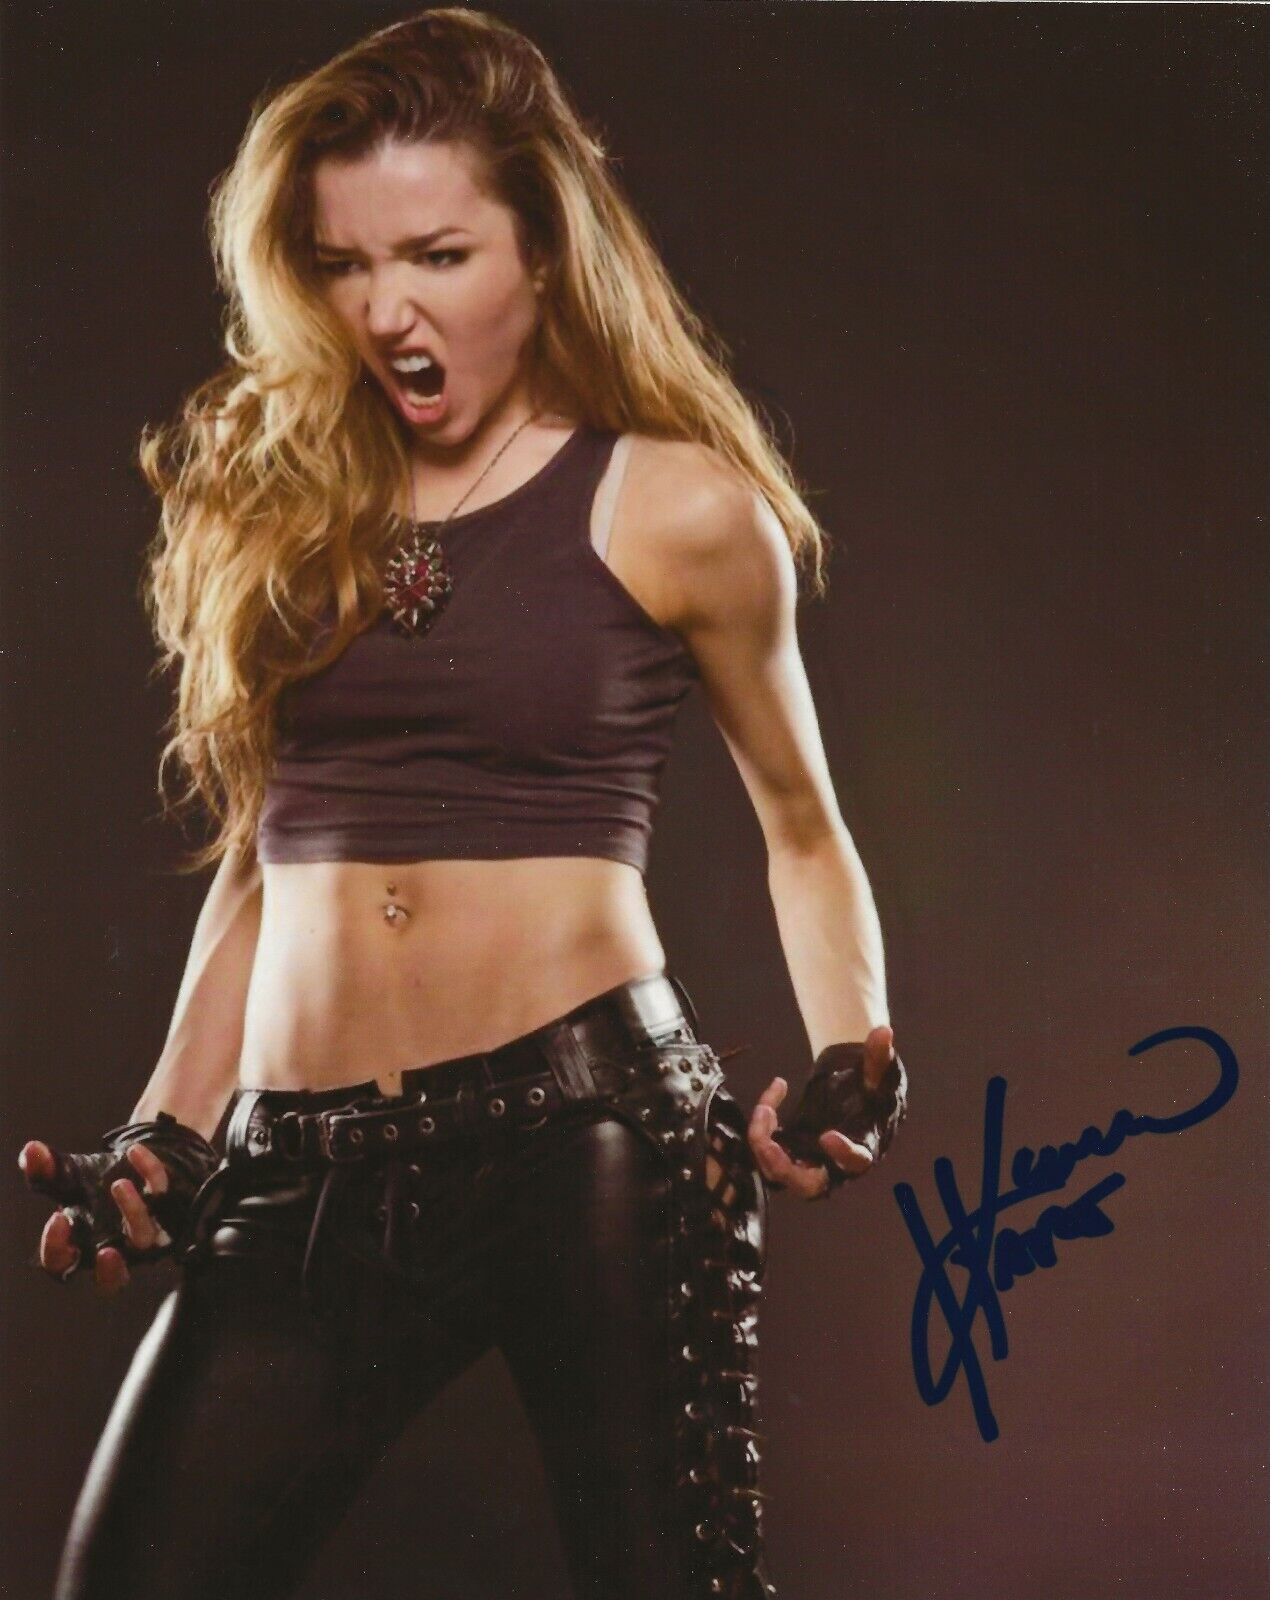 Lauren Hart of Once Human band REAL hand SIGNED Photo Poster painting #1 COA Autographed